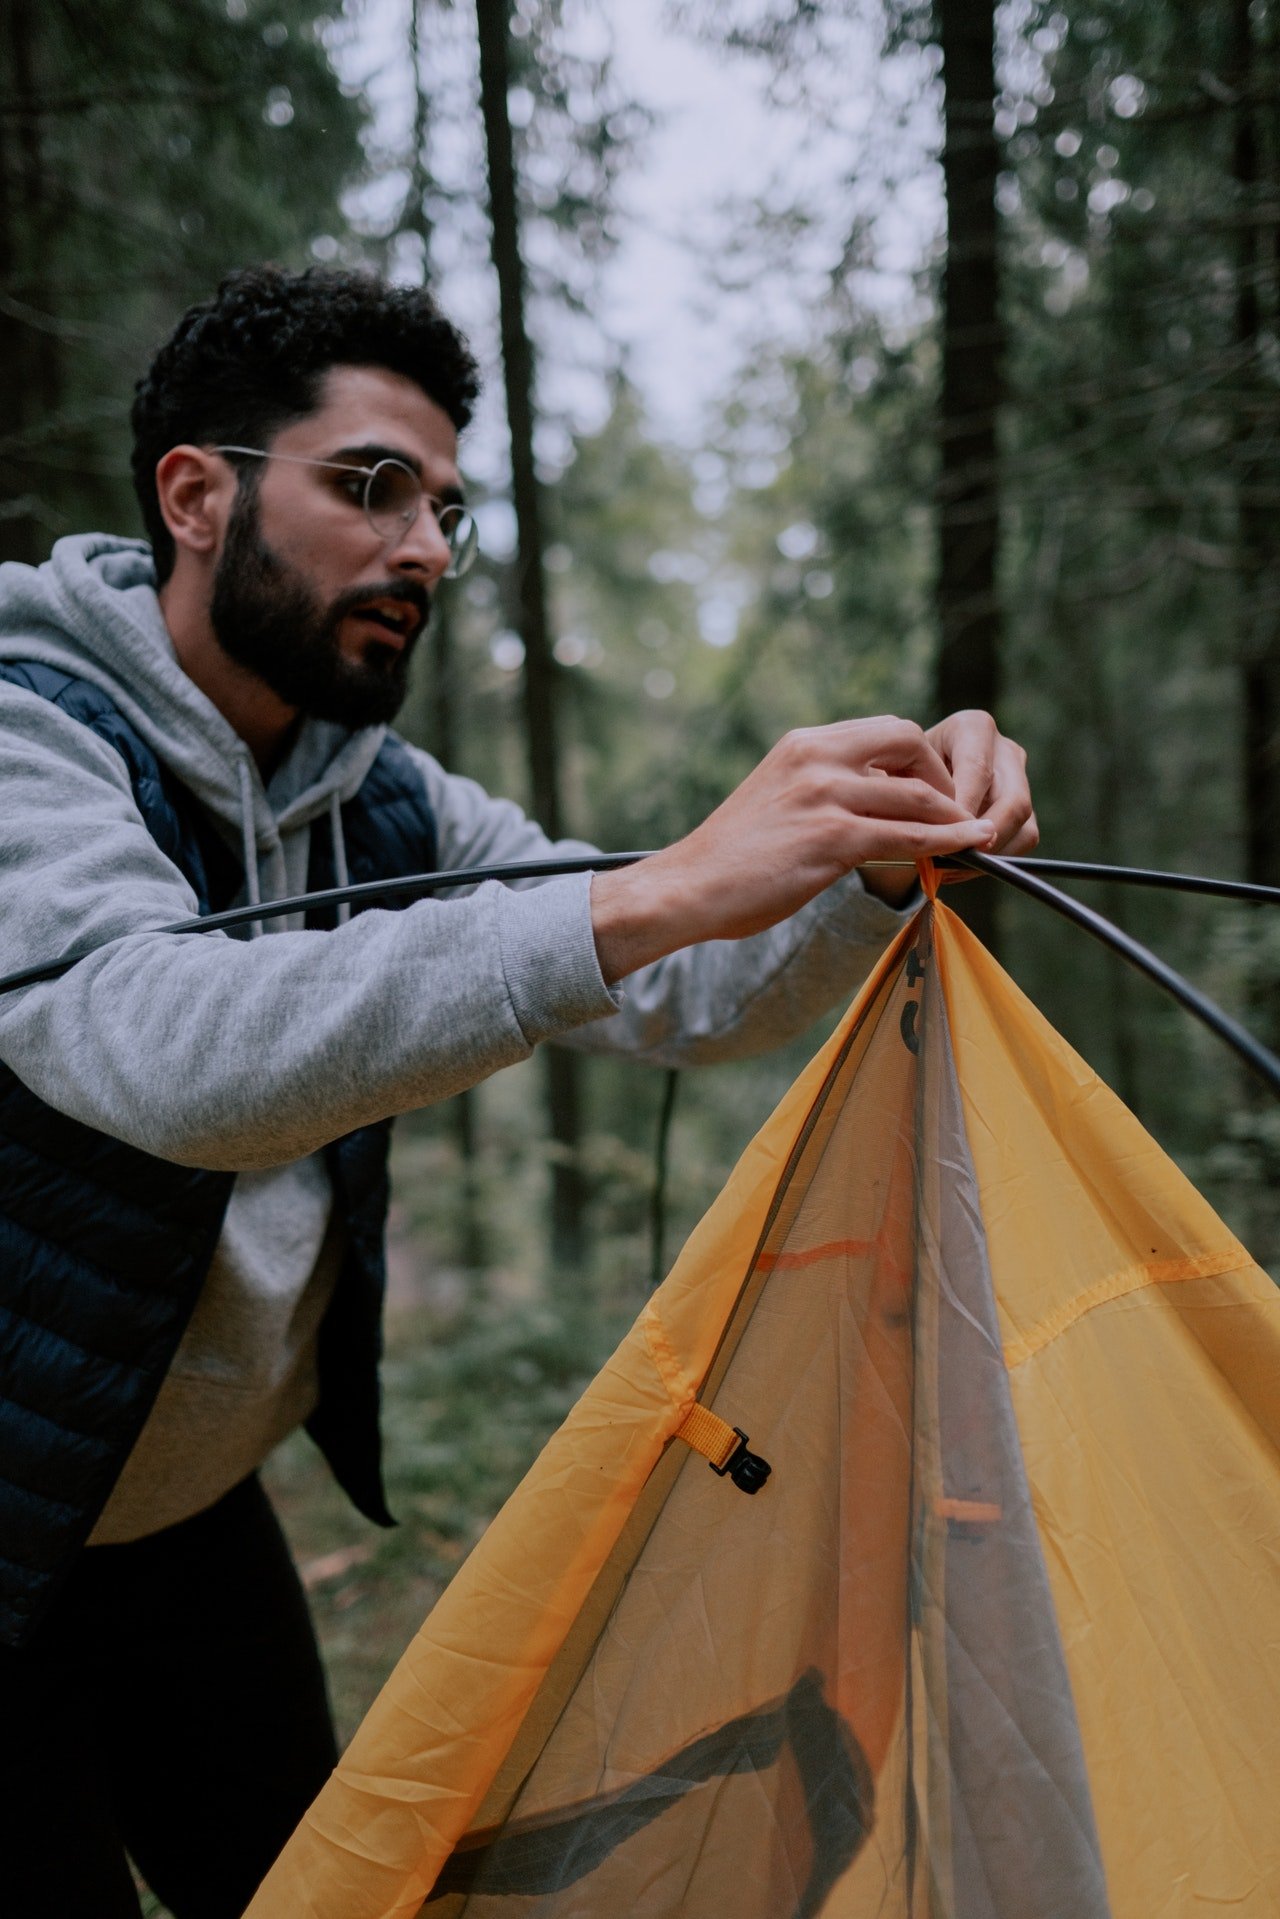 Photo of a man setting up a tent | Photo: Pexels